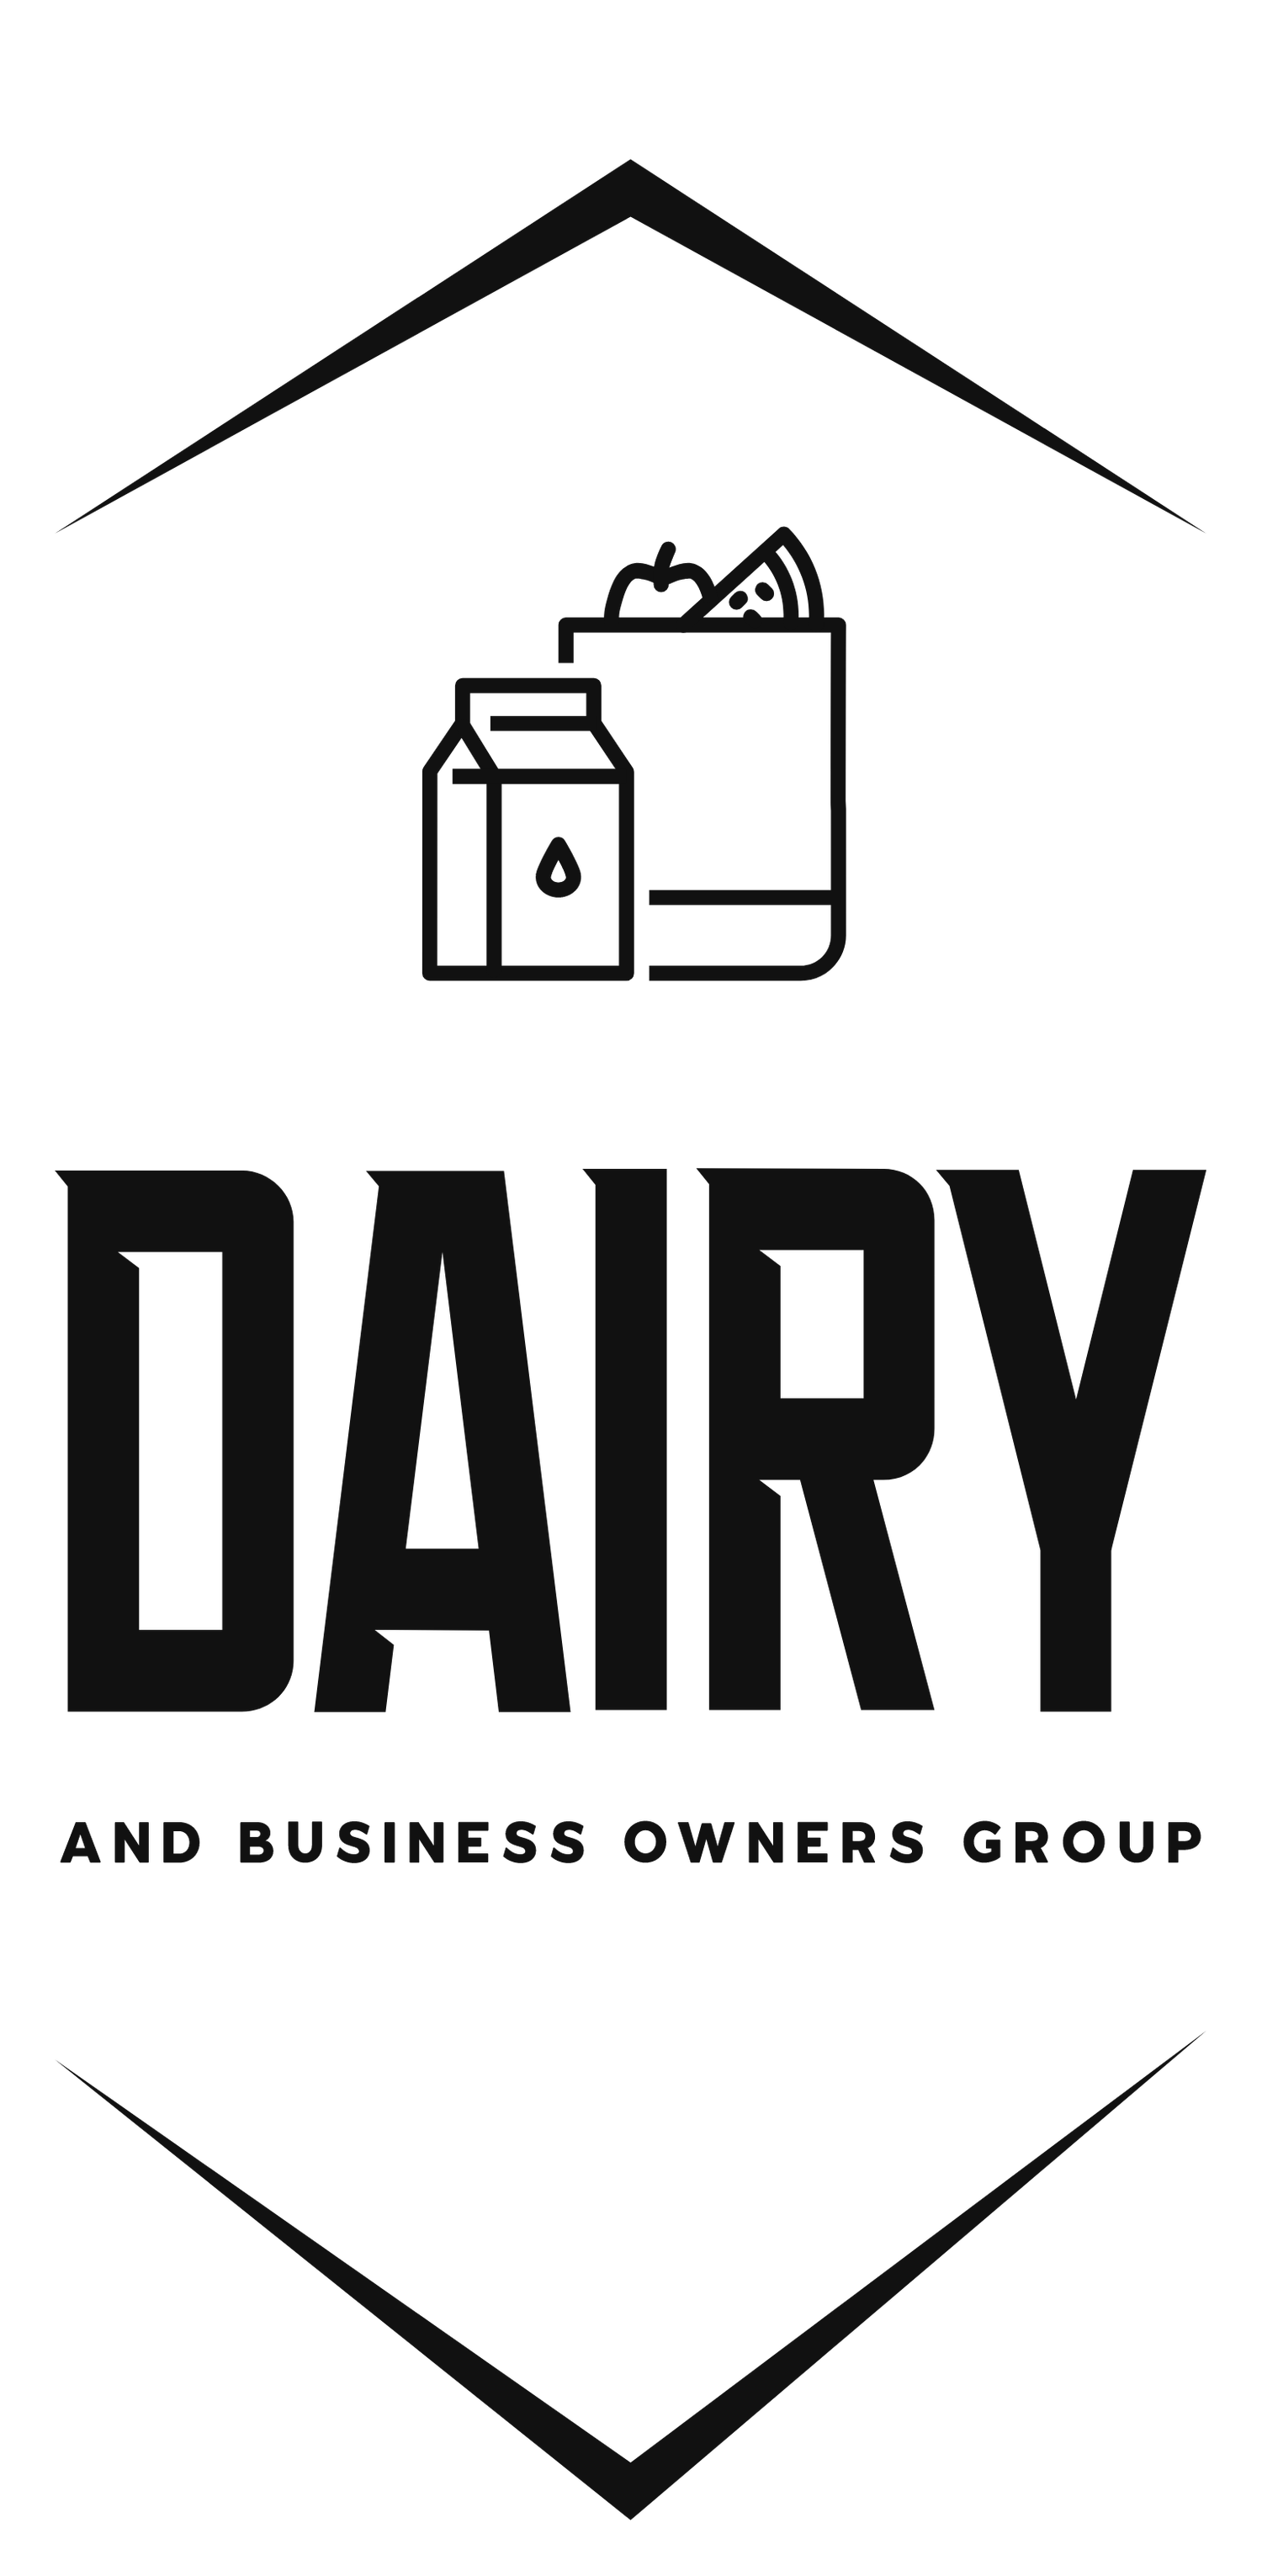 Dairy &amp; Business Owners Group